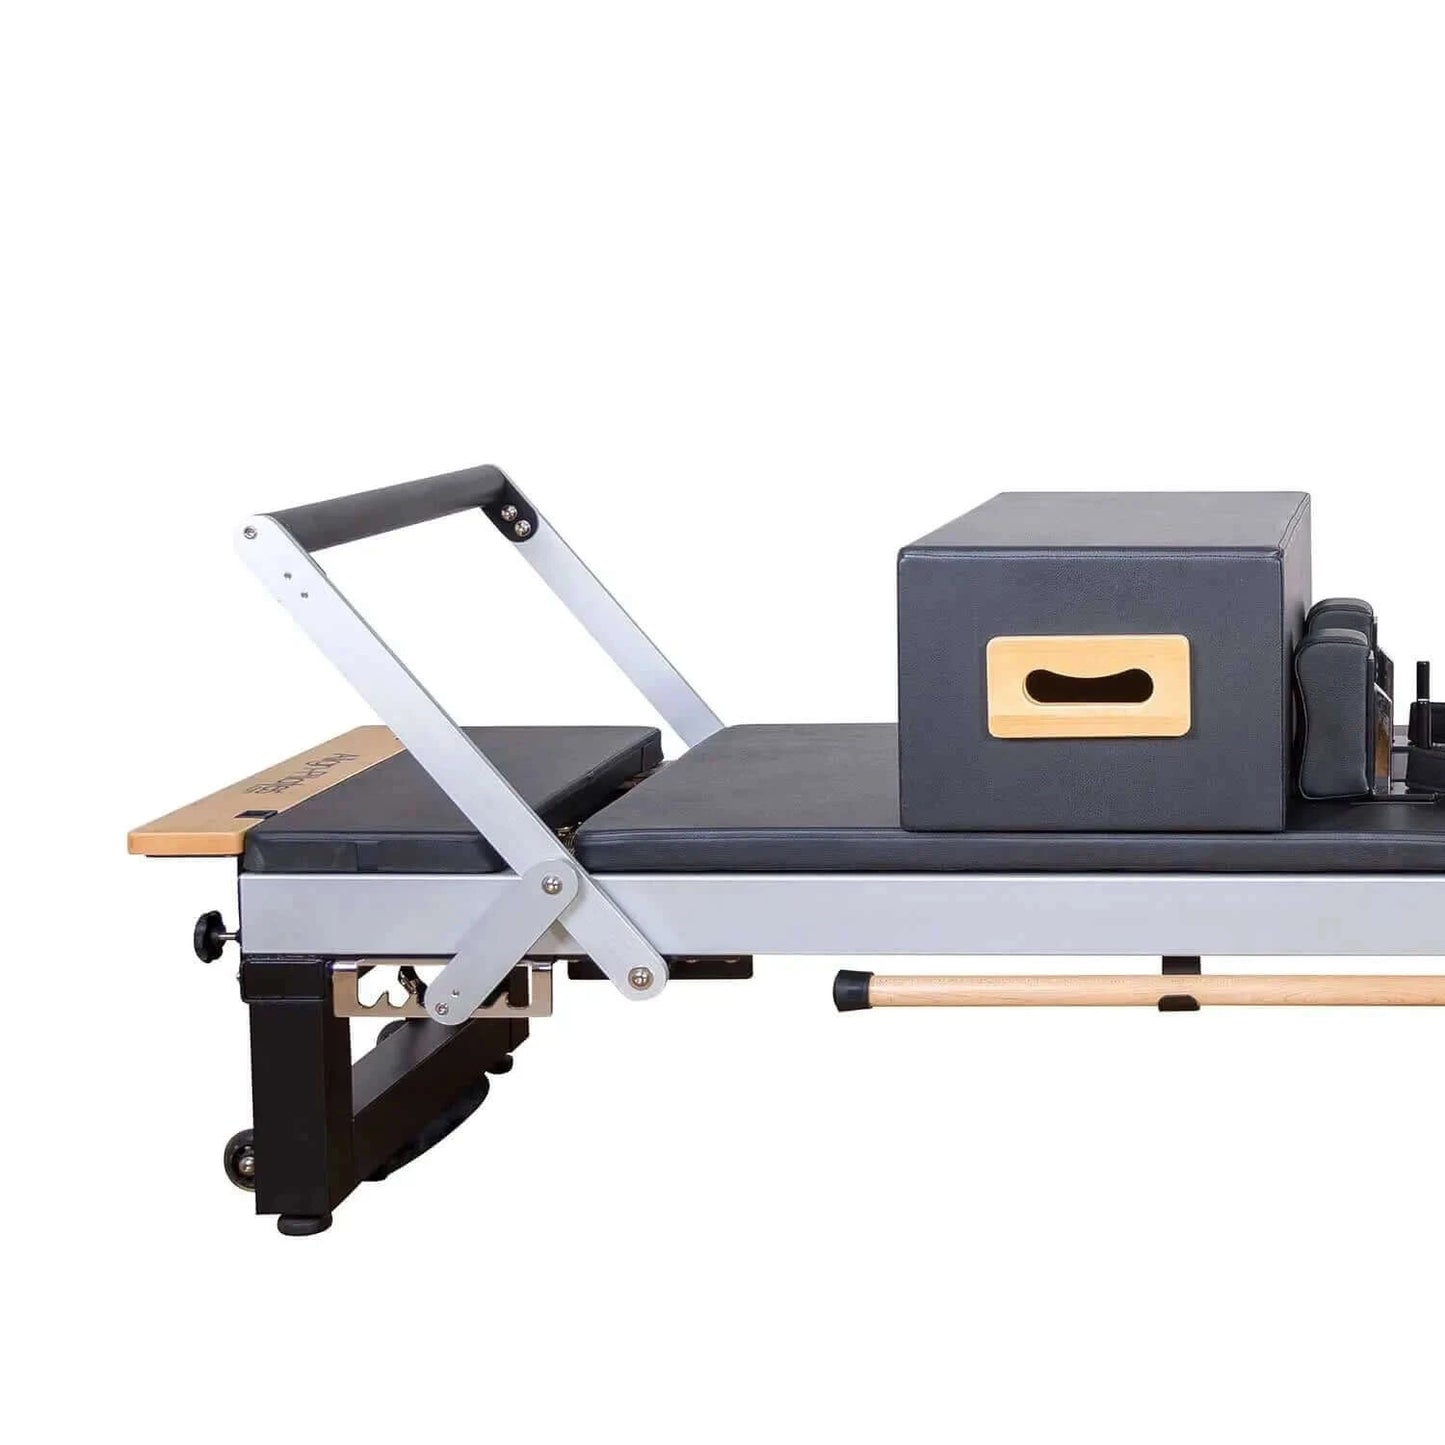  Align Pilates Platform Extender for C Series Reformer by Align Pilates sold by Pilates Matters® by BSP LLC